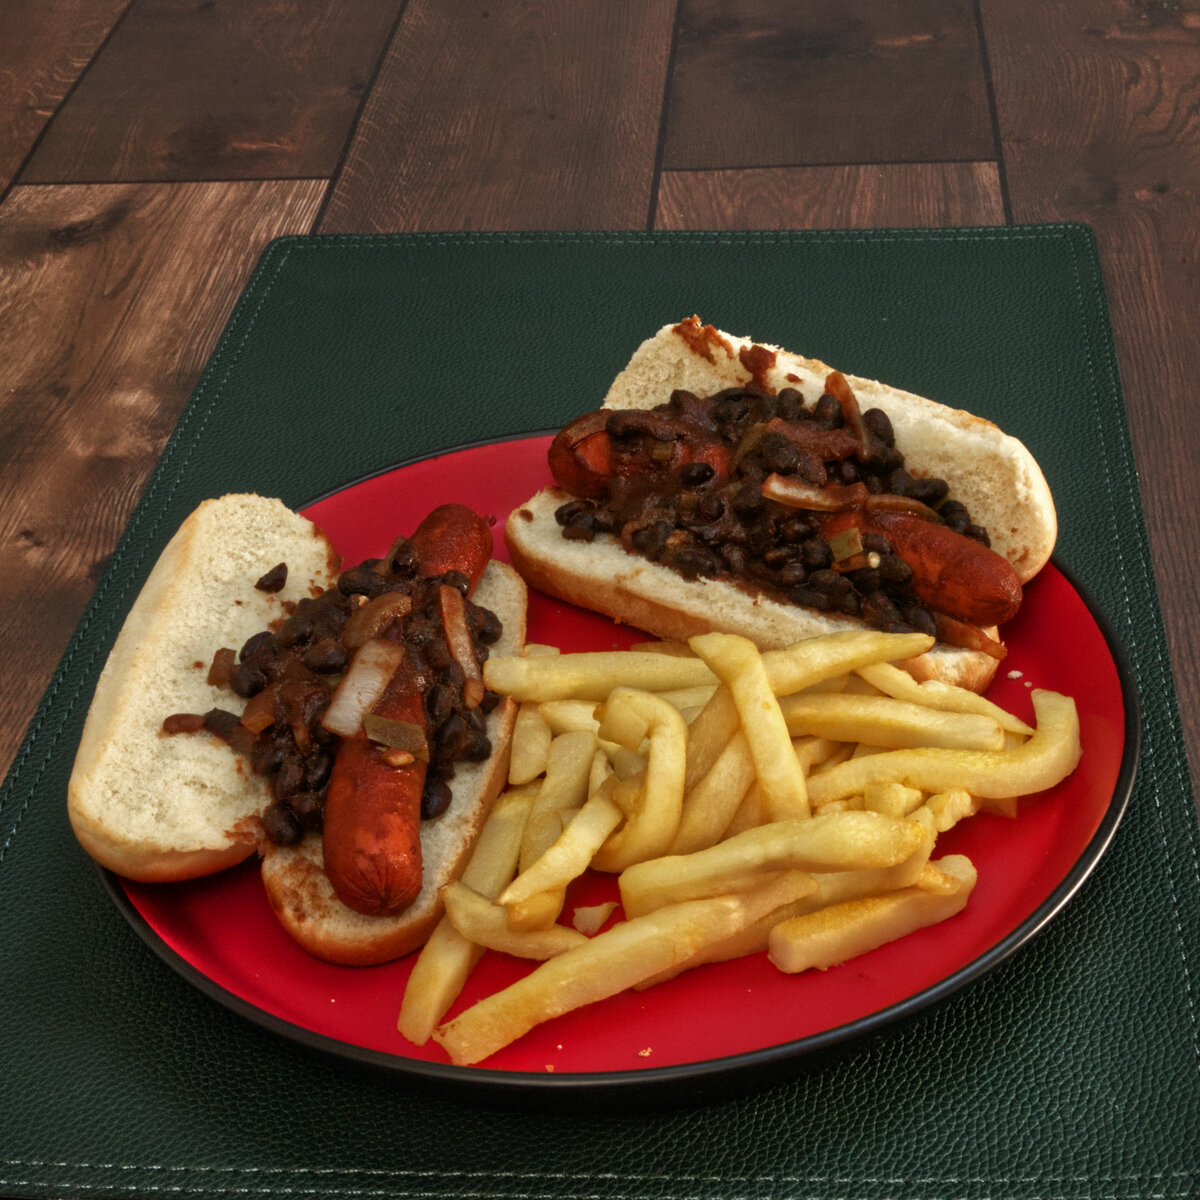 Chili Dogs with French Fries